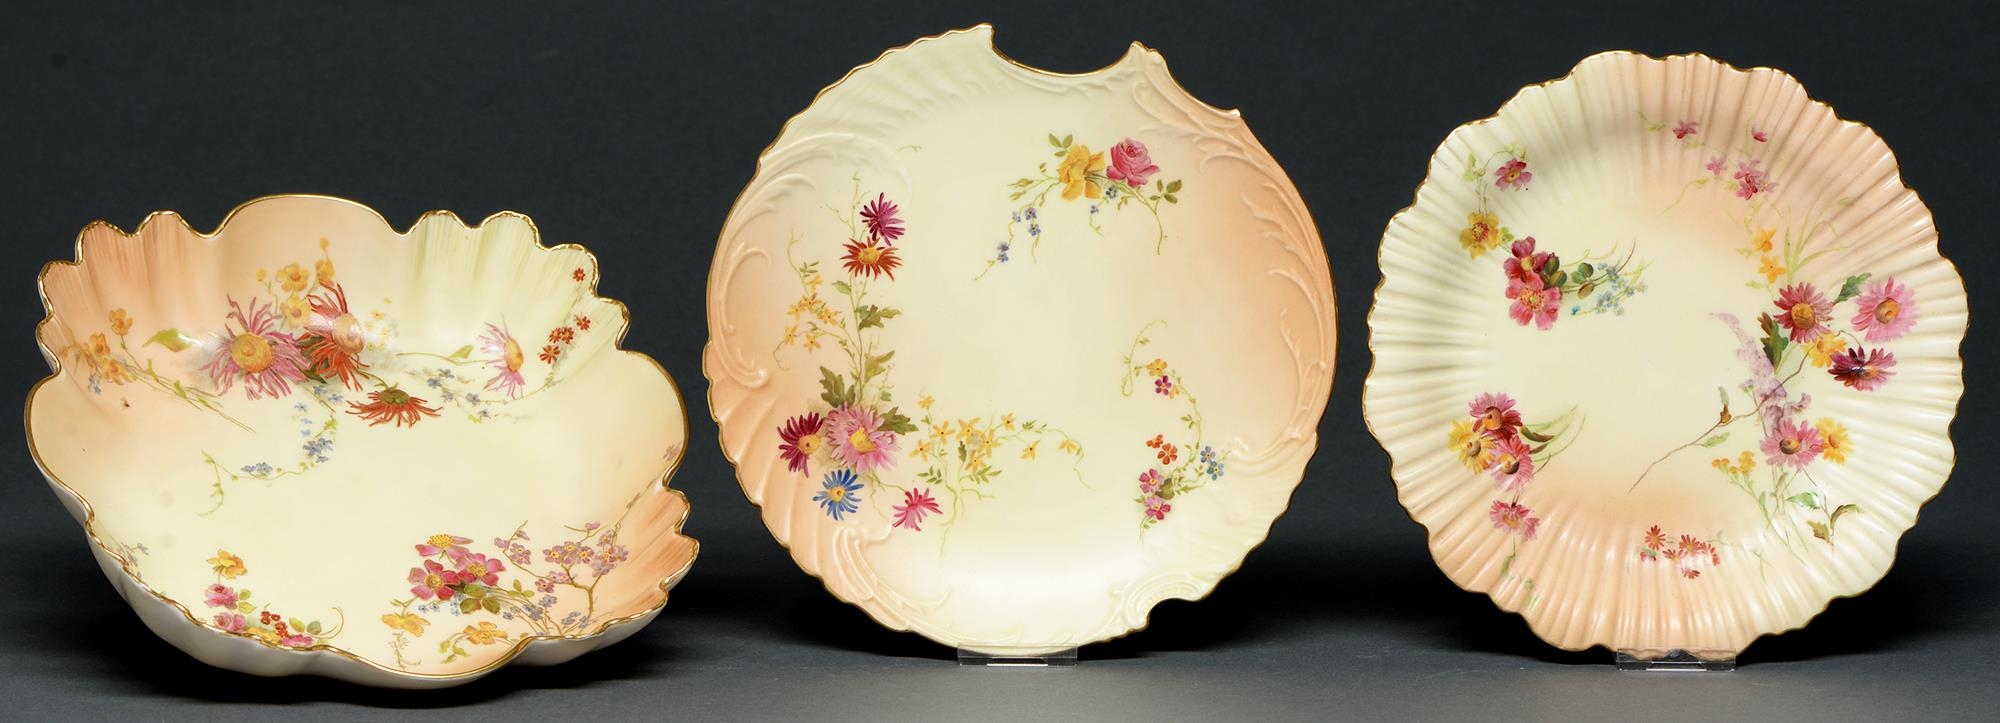 A Royal Worcester shell shaped dessert dish, Moore dessert plate and another, 1897-99, printed and